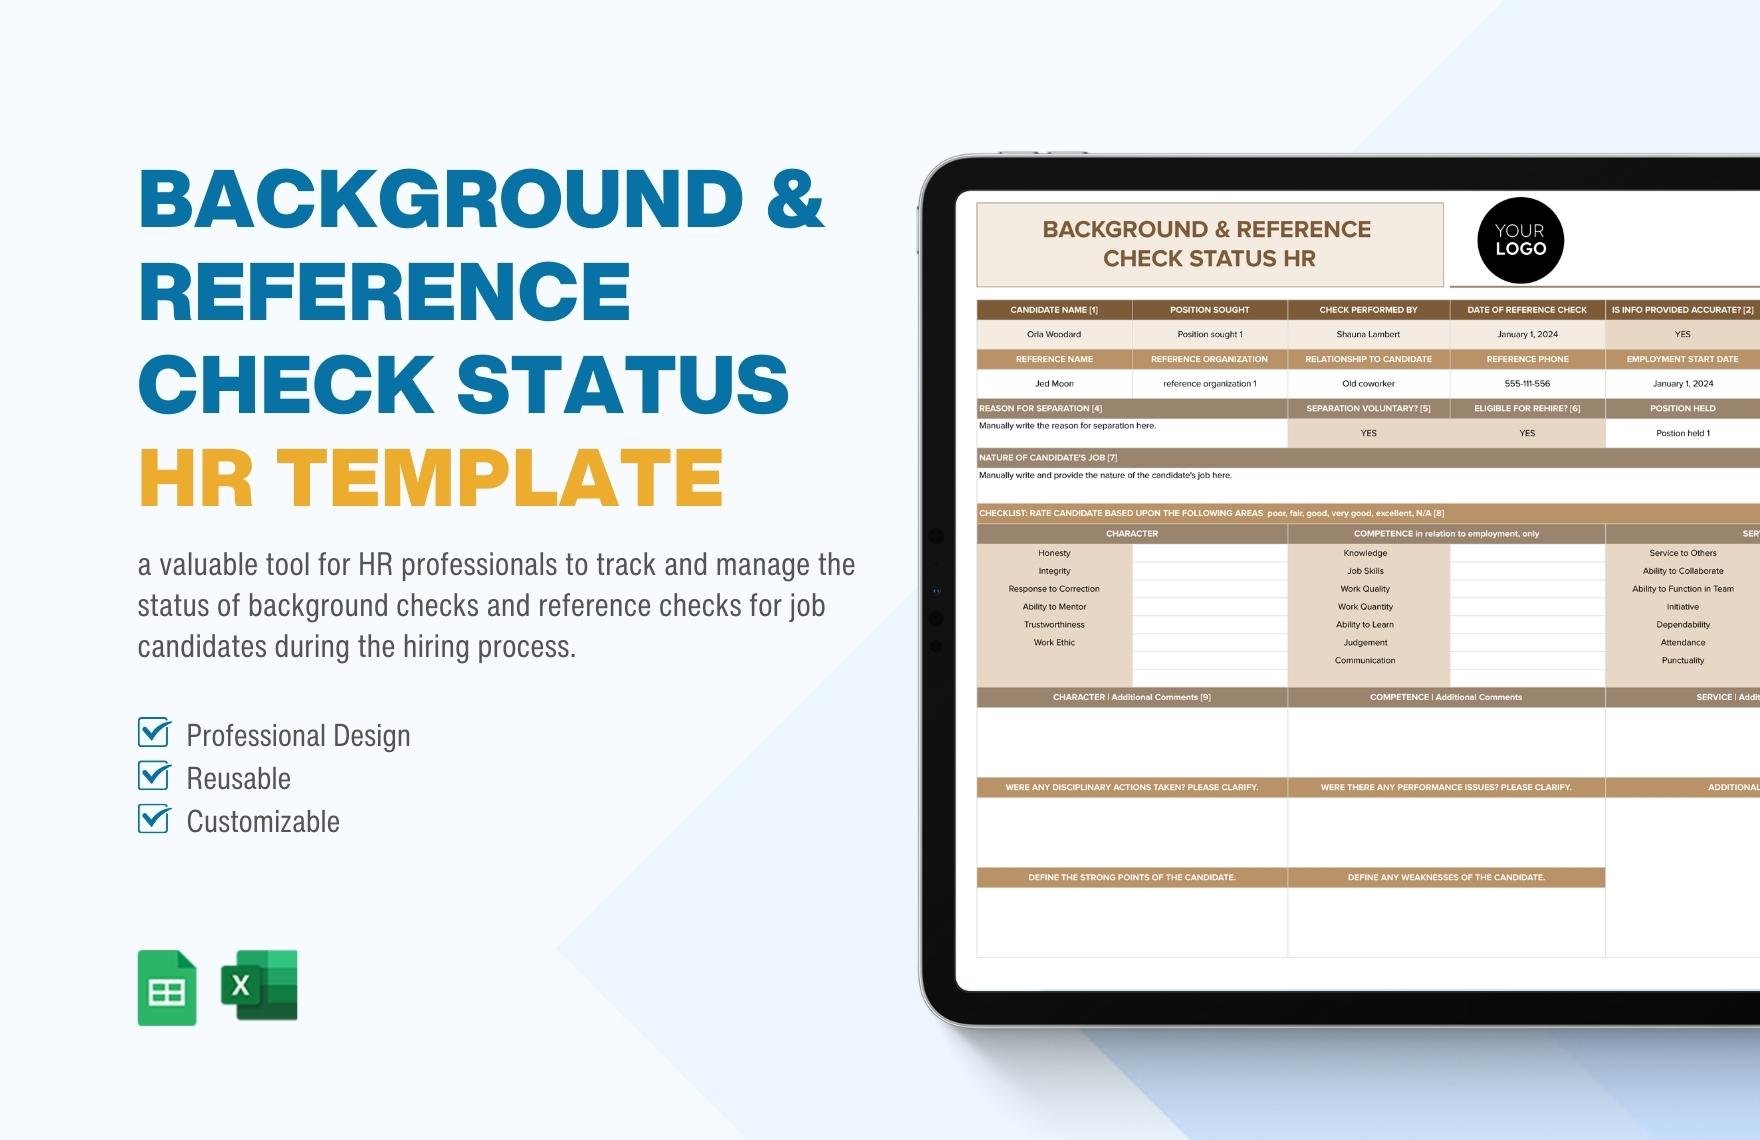 Background & Reference Check Status HR Template